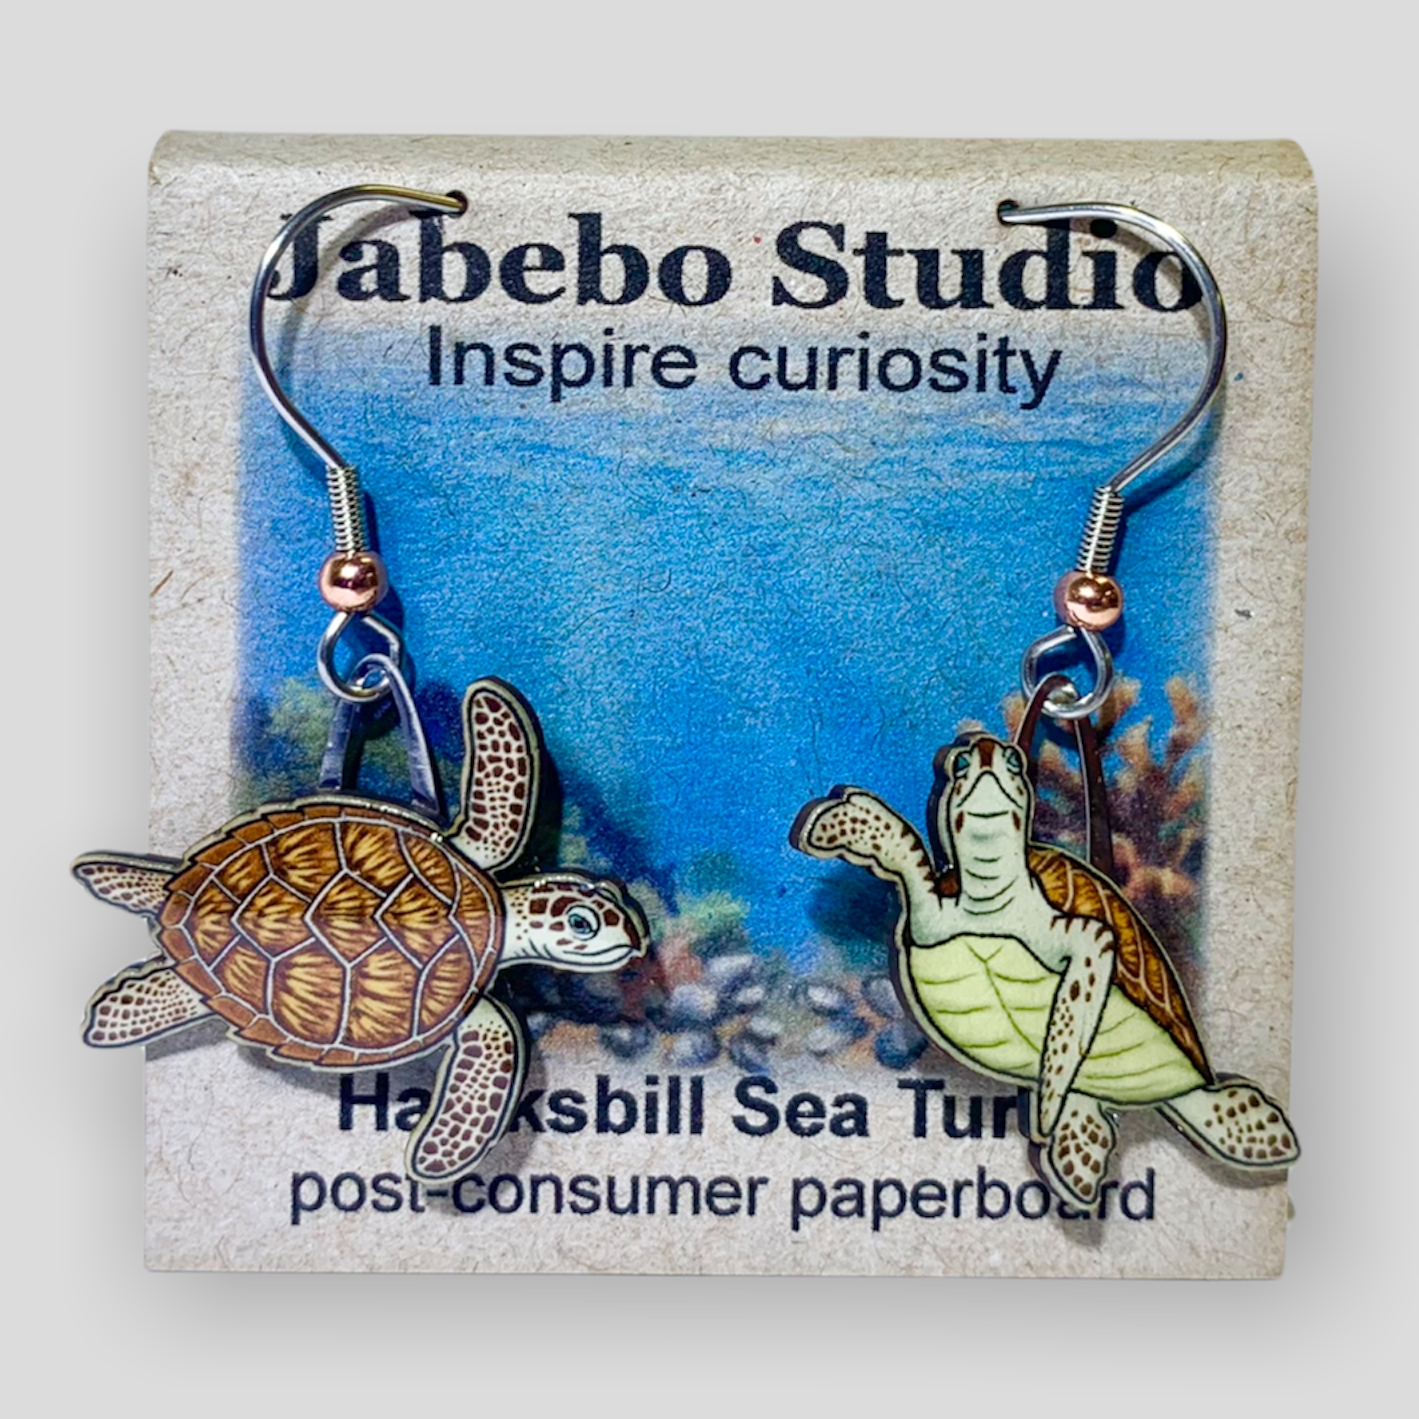 Picture shown is of 1 inch tall pair of earrings of the marine animal the Hawksbill Sea Turtle.